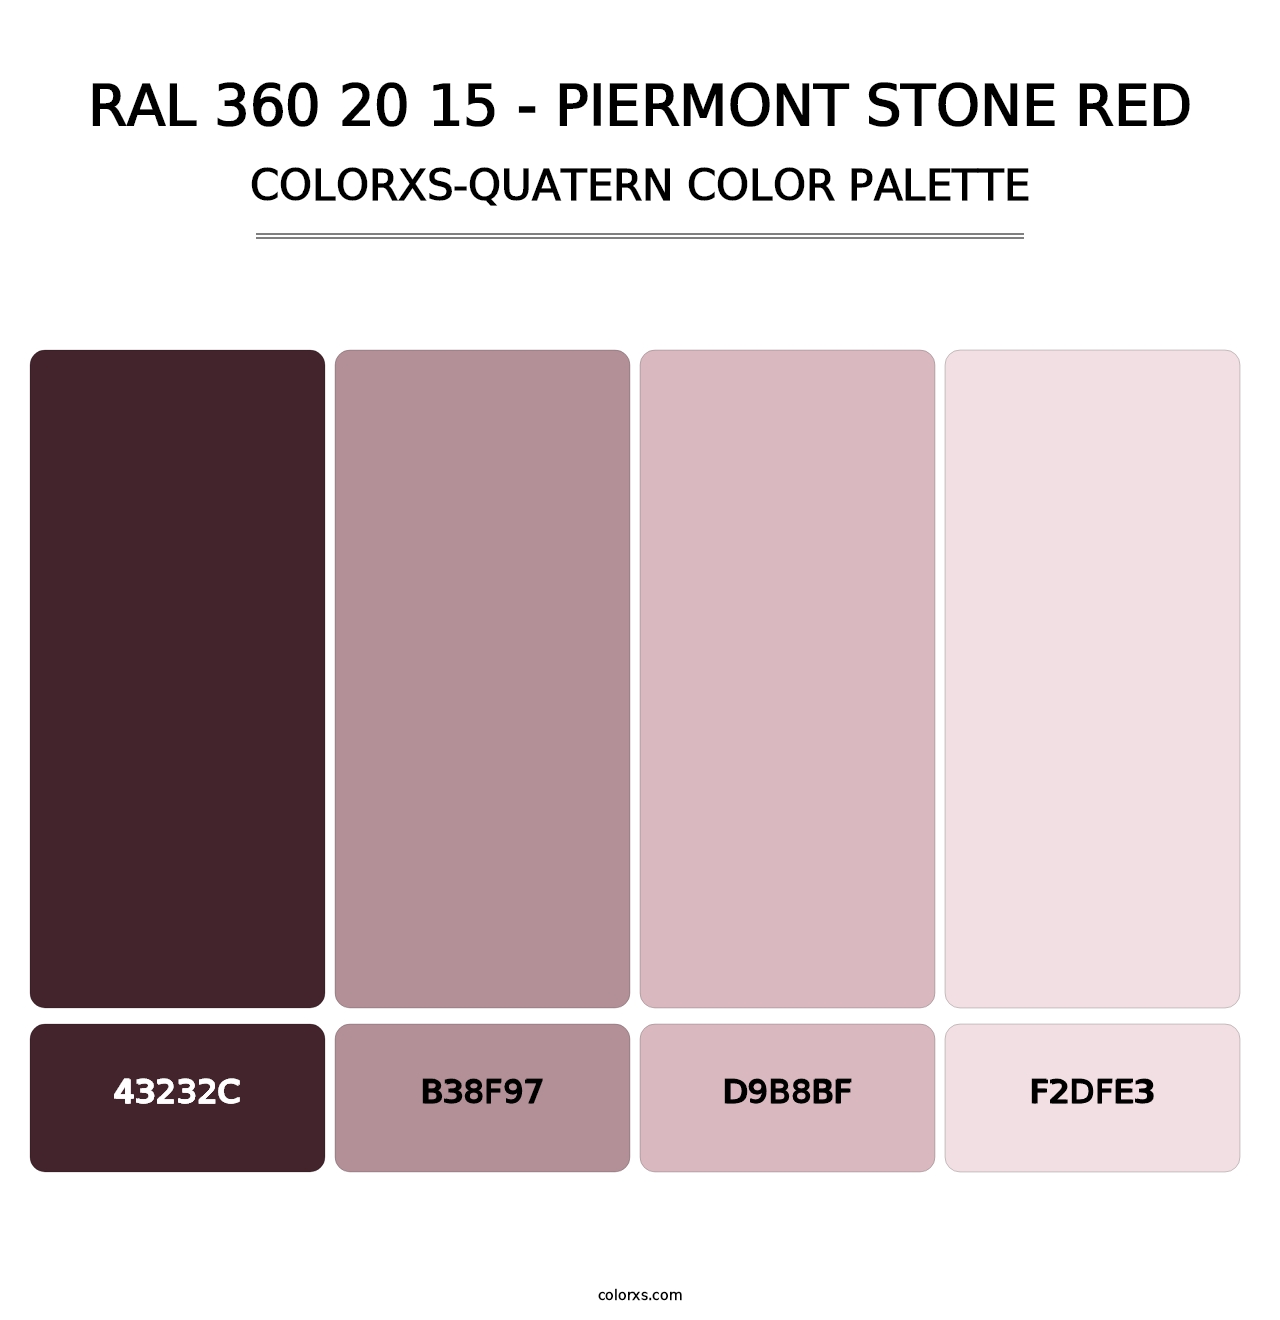 RAL 360 20 15 - Piermont Stone Red - Colorxs Quatern Palette